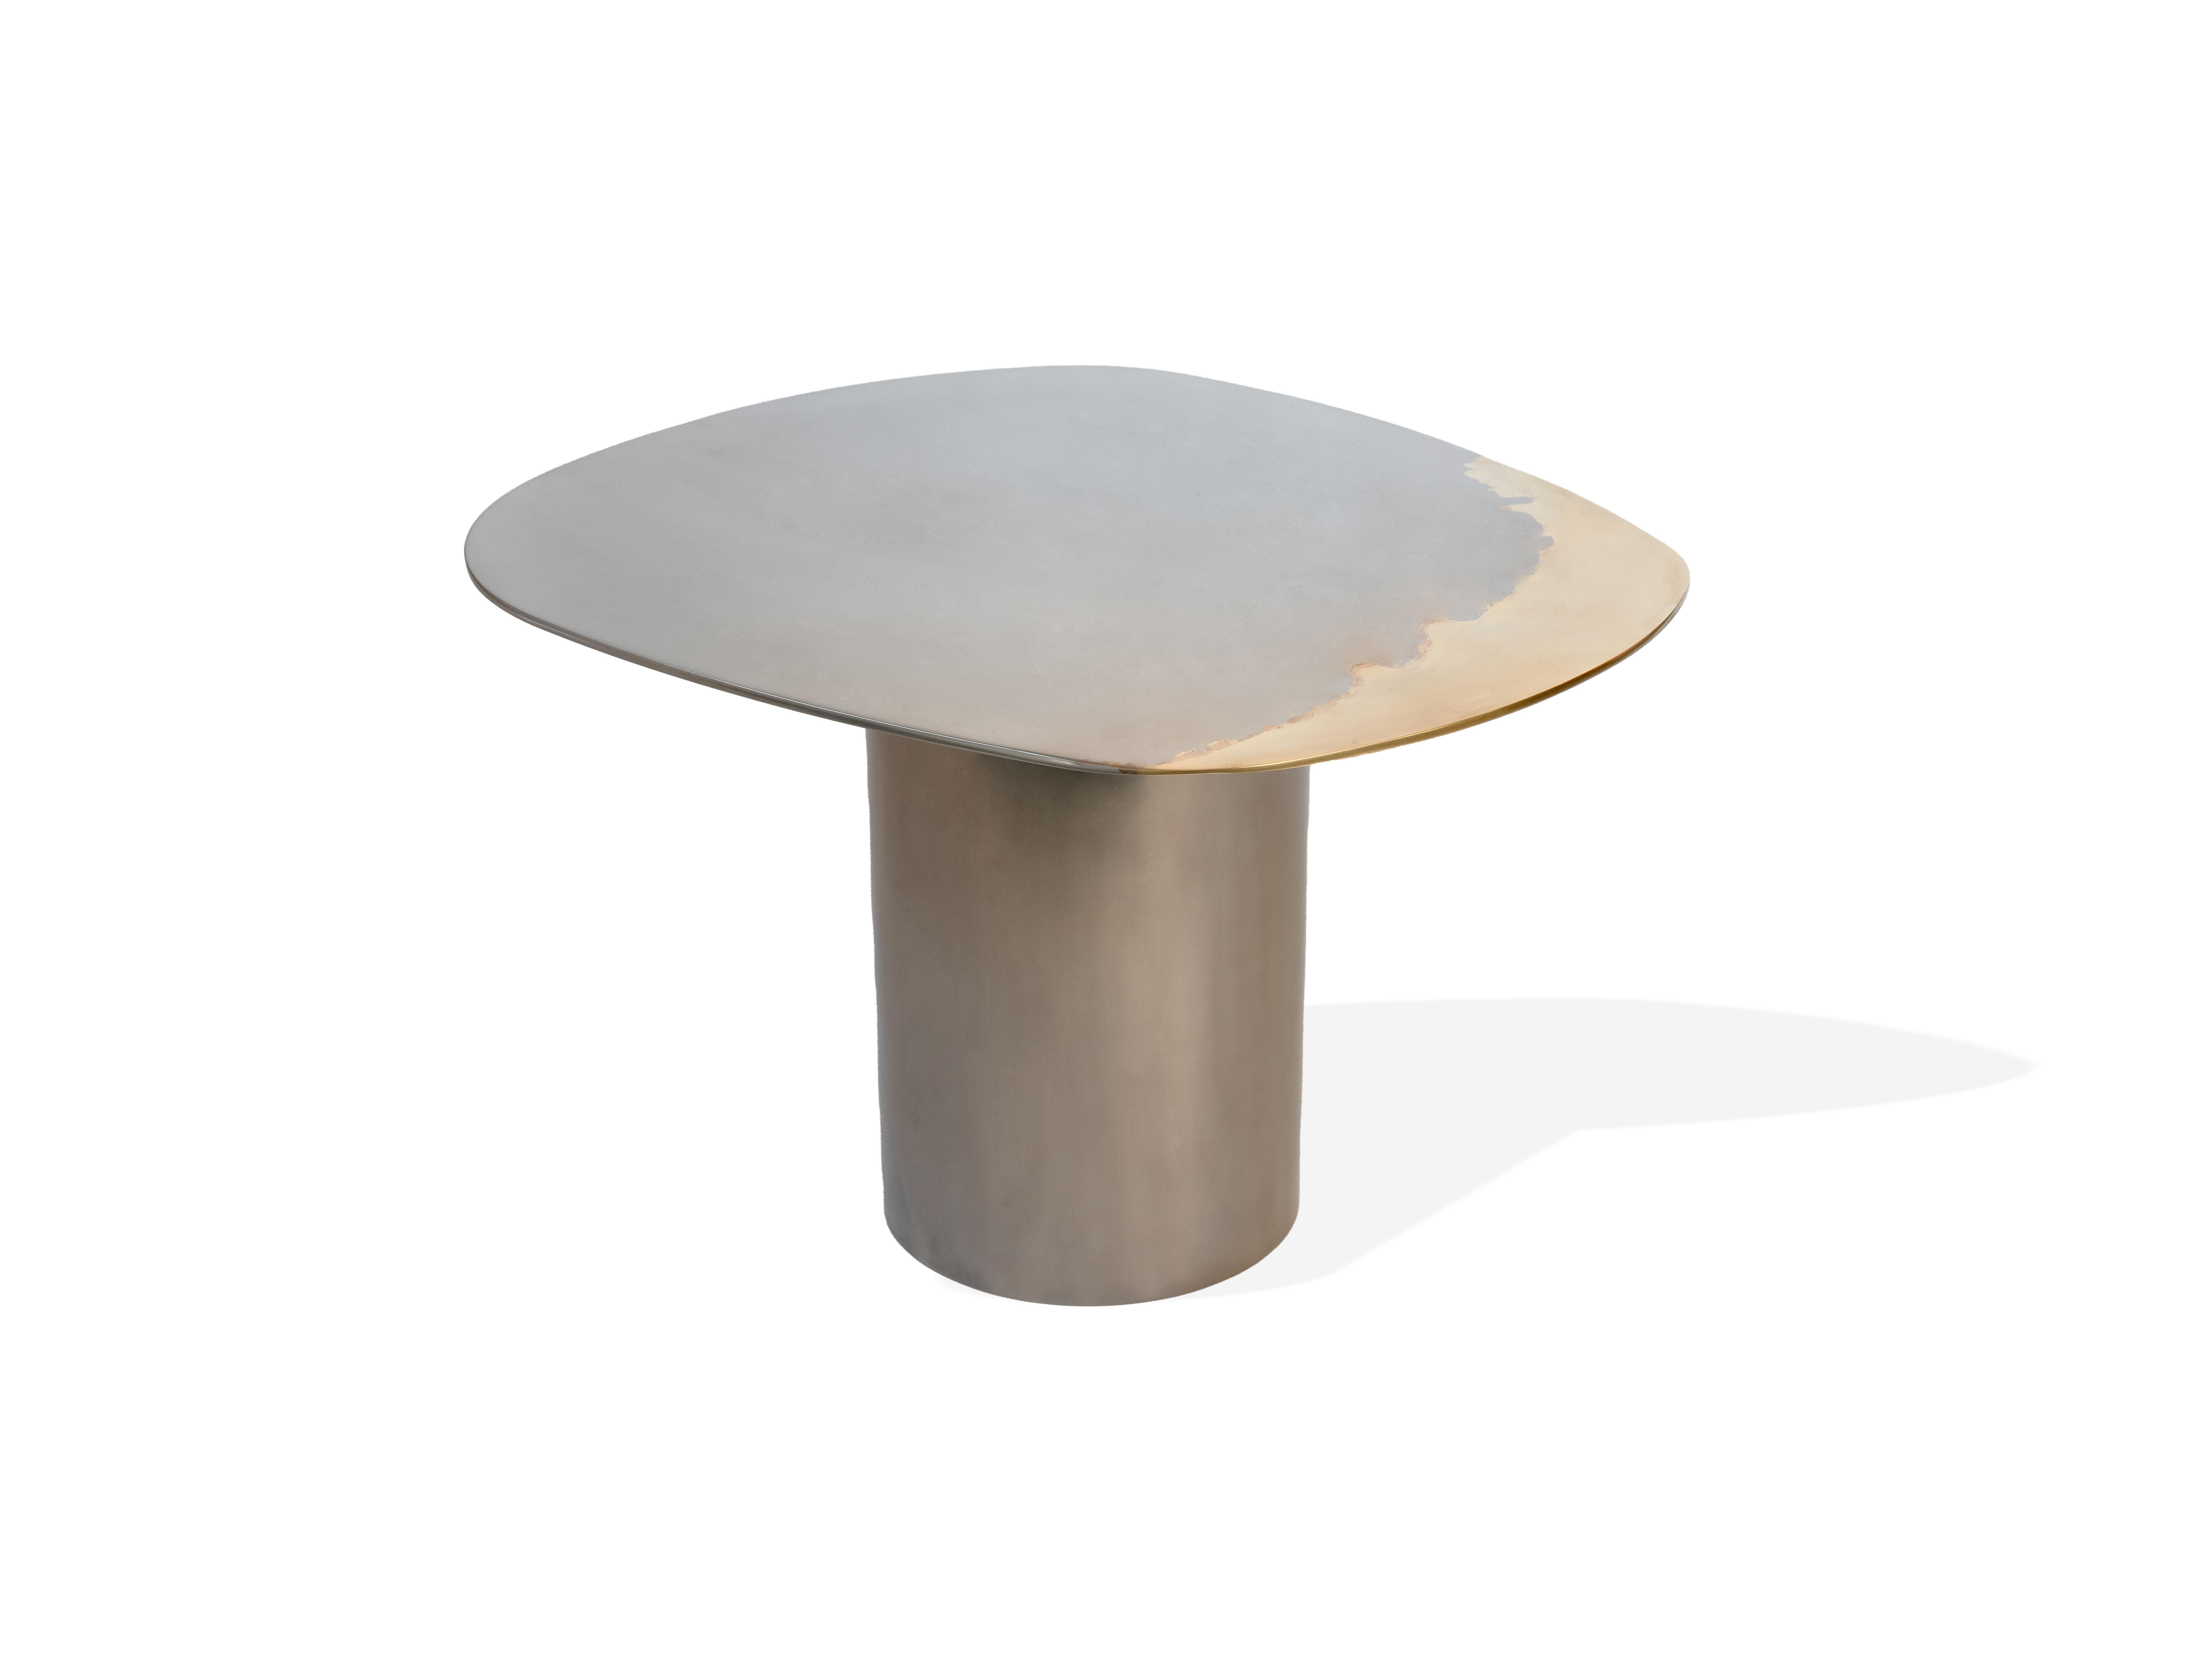 A set of nesting tables as part of the Transition collection, featuring unique, artistic mirror polished tabletops, crafted from brass and stainless steel on tubular bases.

Studio Warm has developed a distinctive, high-end, artistic finish blending